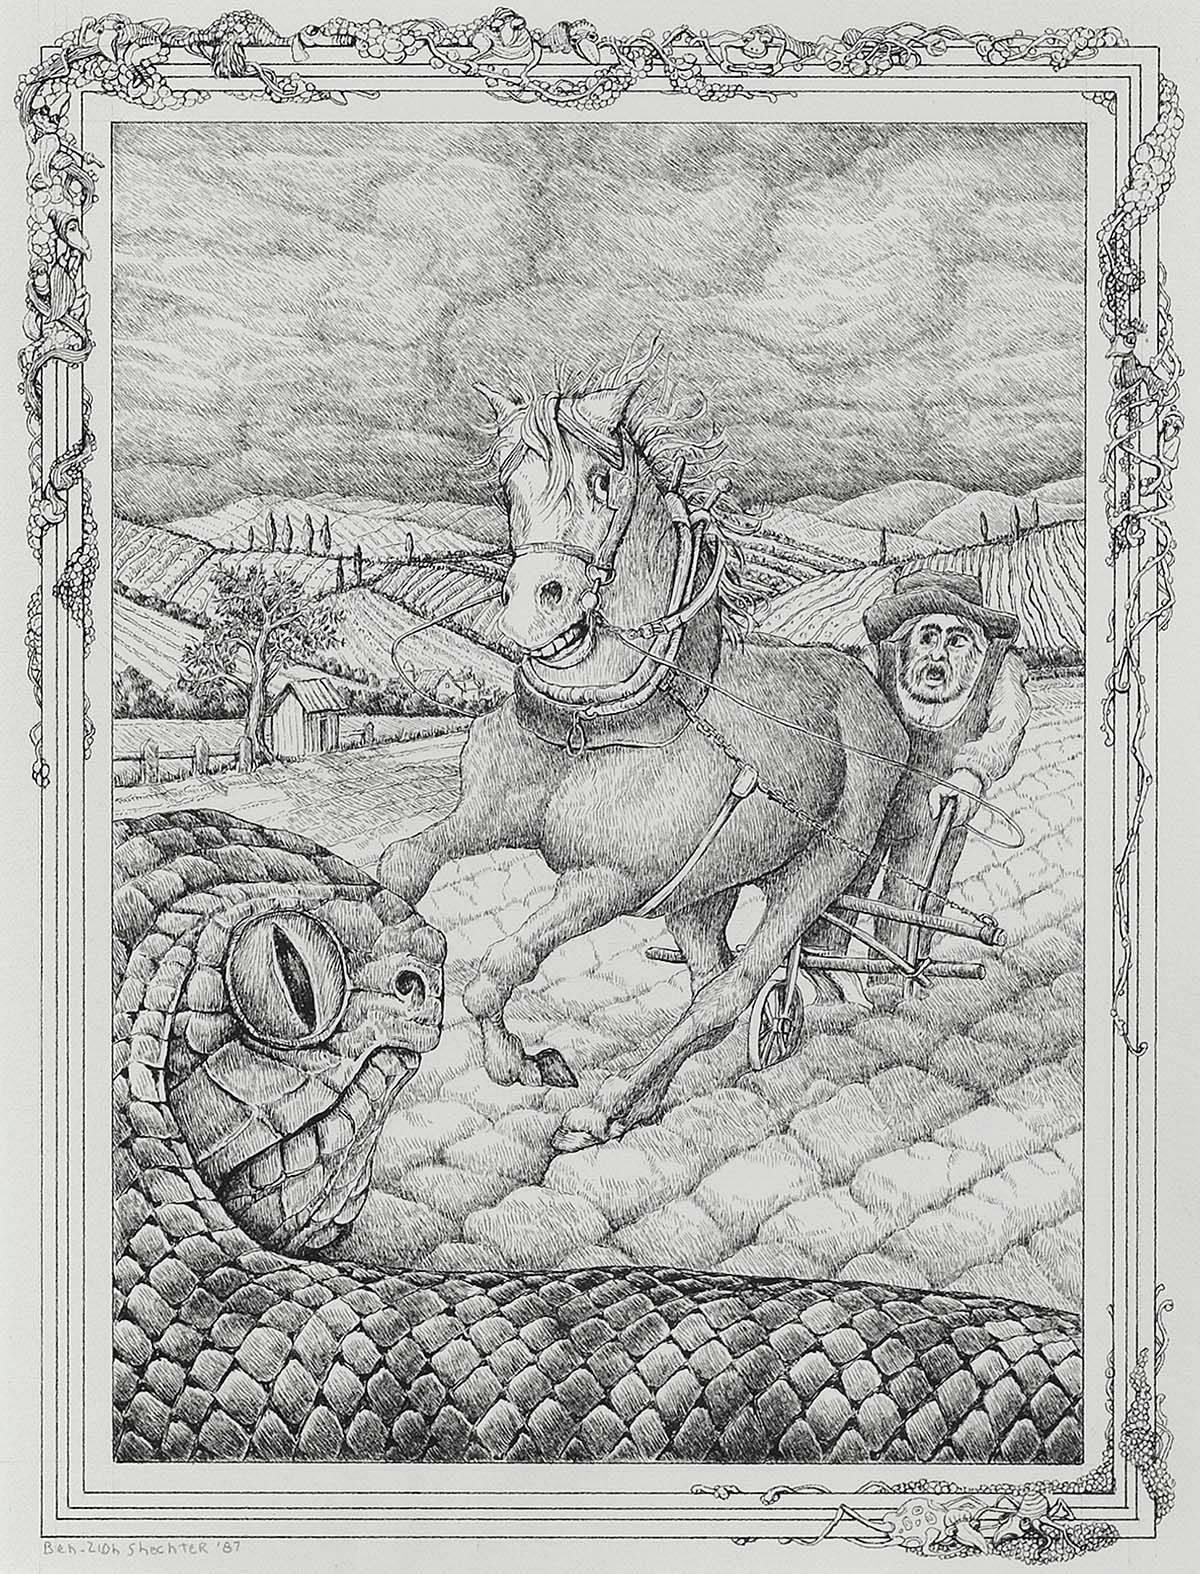 THE SNAKE, (Rearing Horse with Farmer) - Art by Ben Zion Shechter